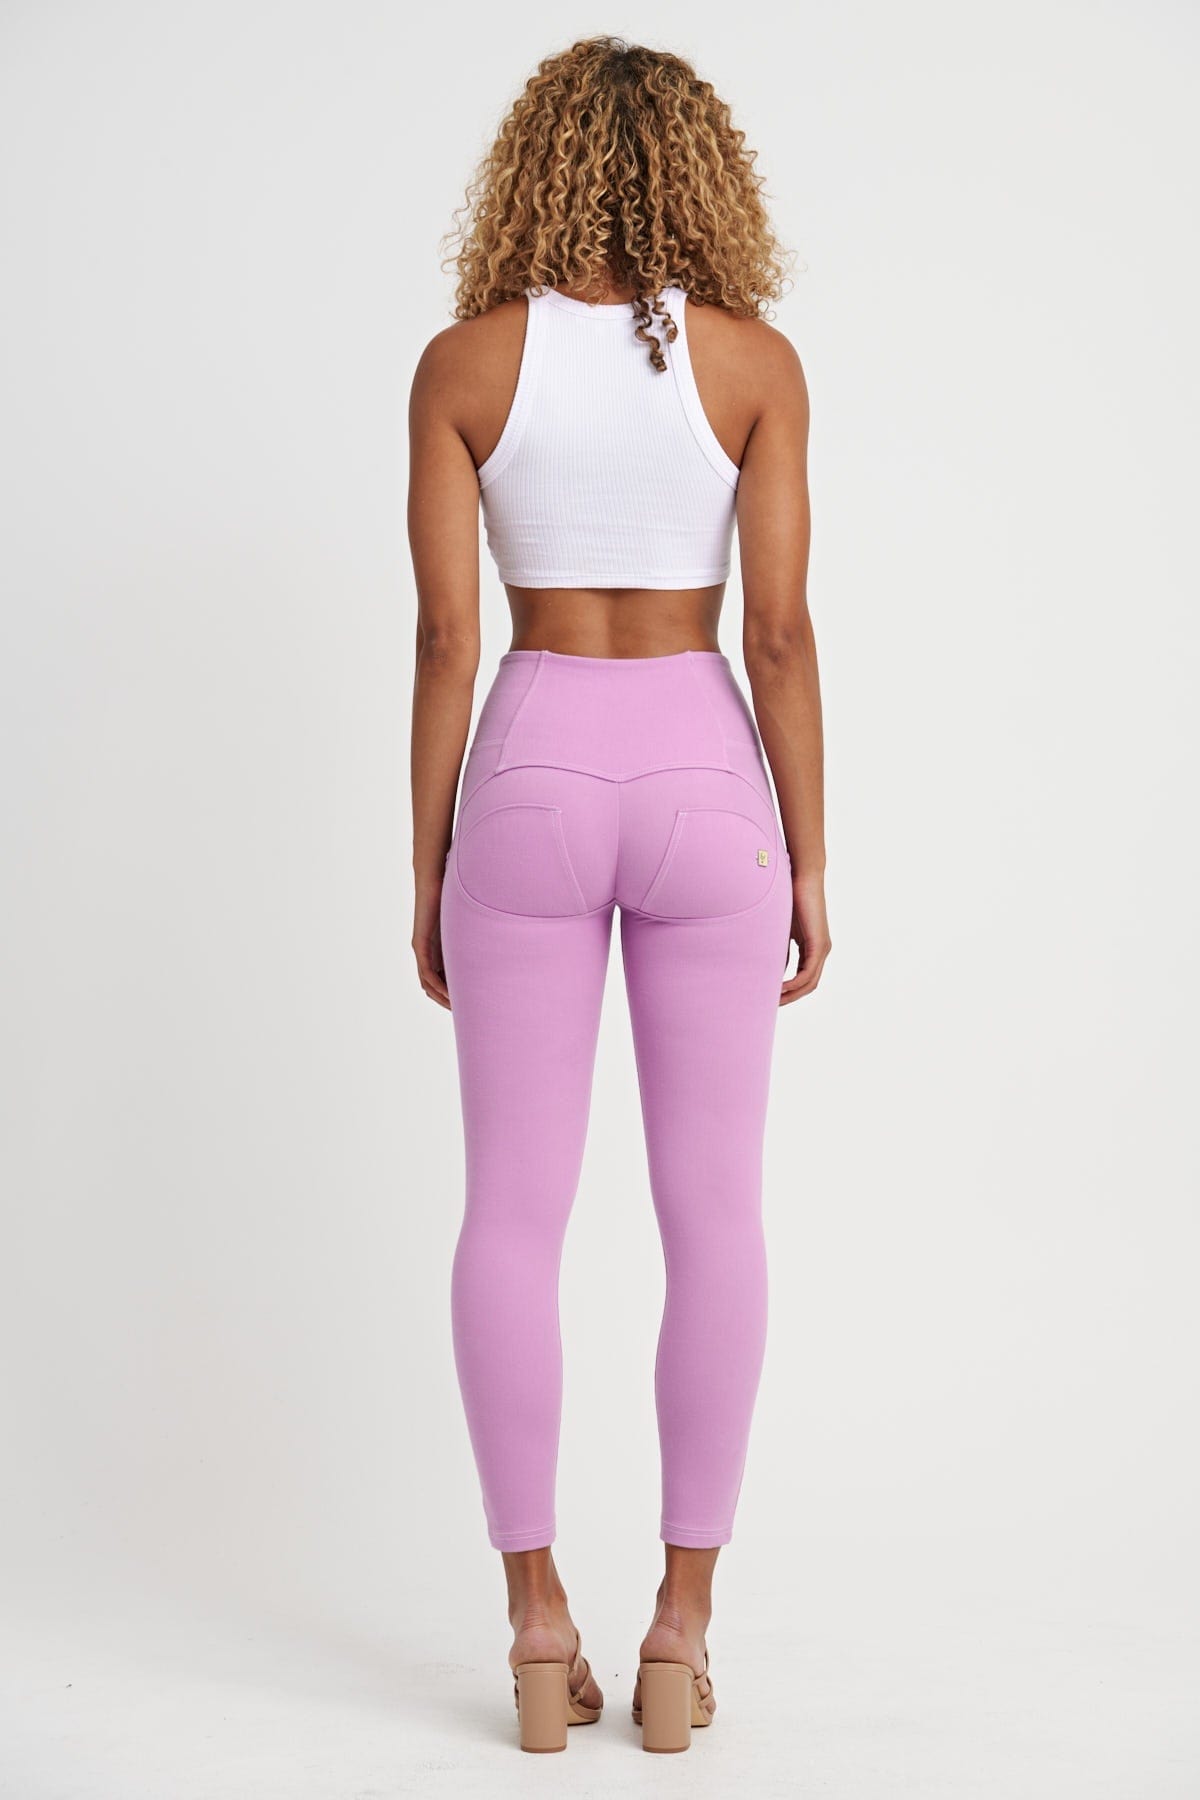 WR.UP® Drill Limited Edition - High Waisted - 7/8 Length - Lilac 7